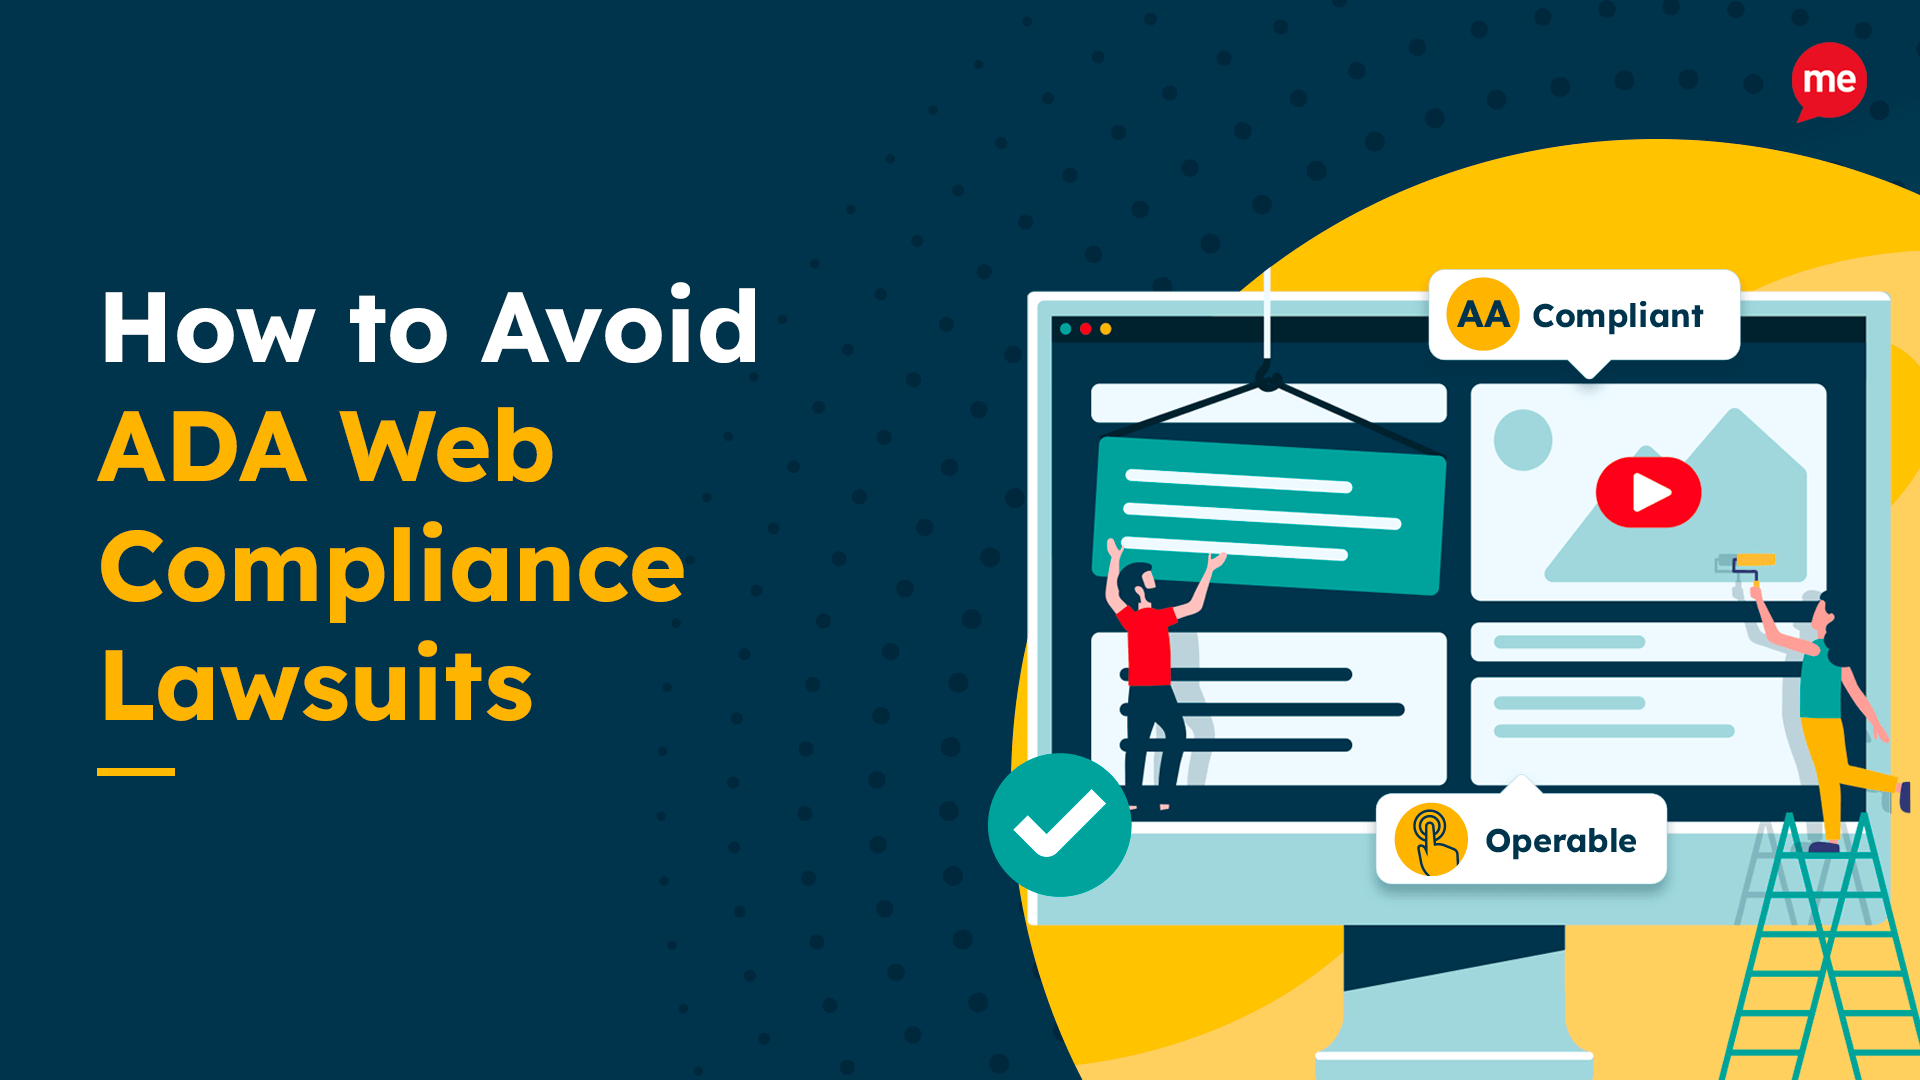 How to Avoid ADA Web Compliance Lawsuits